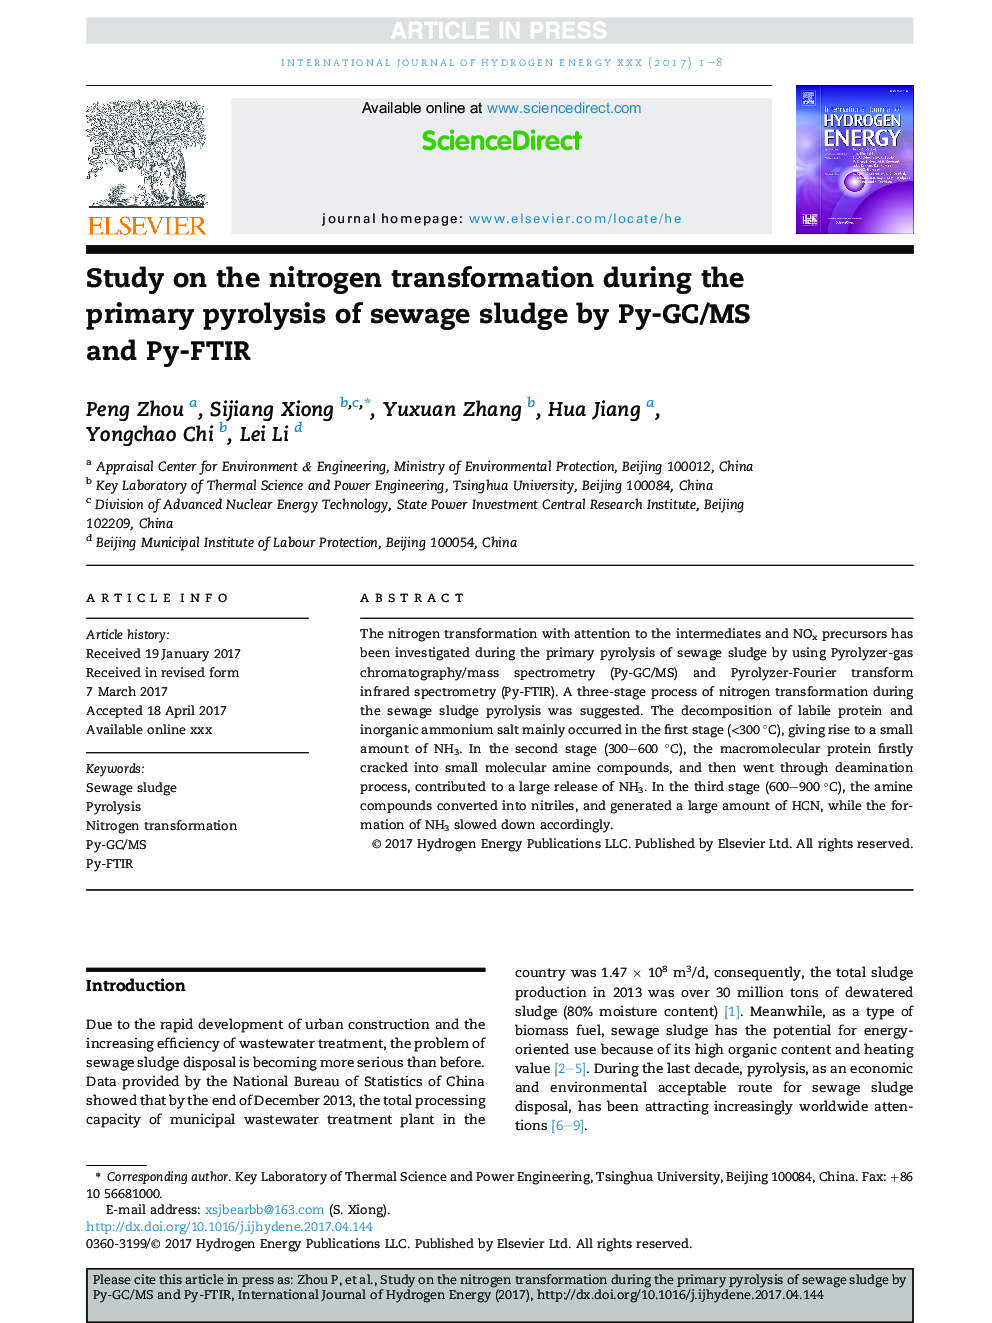 Study on the nitrogen transformation during the primary pyrolysis of sewage sludge by Py-GC/MS and Py-FTIR